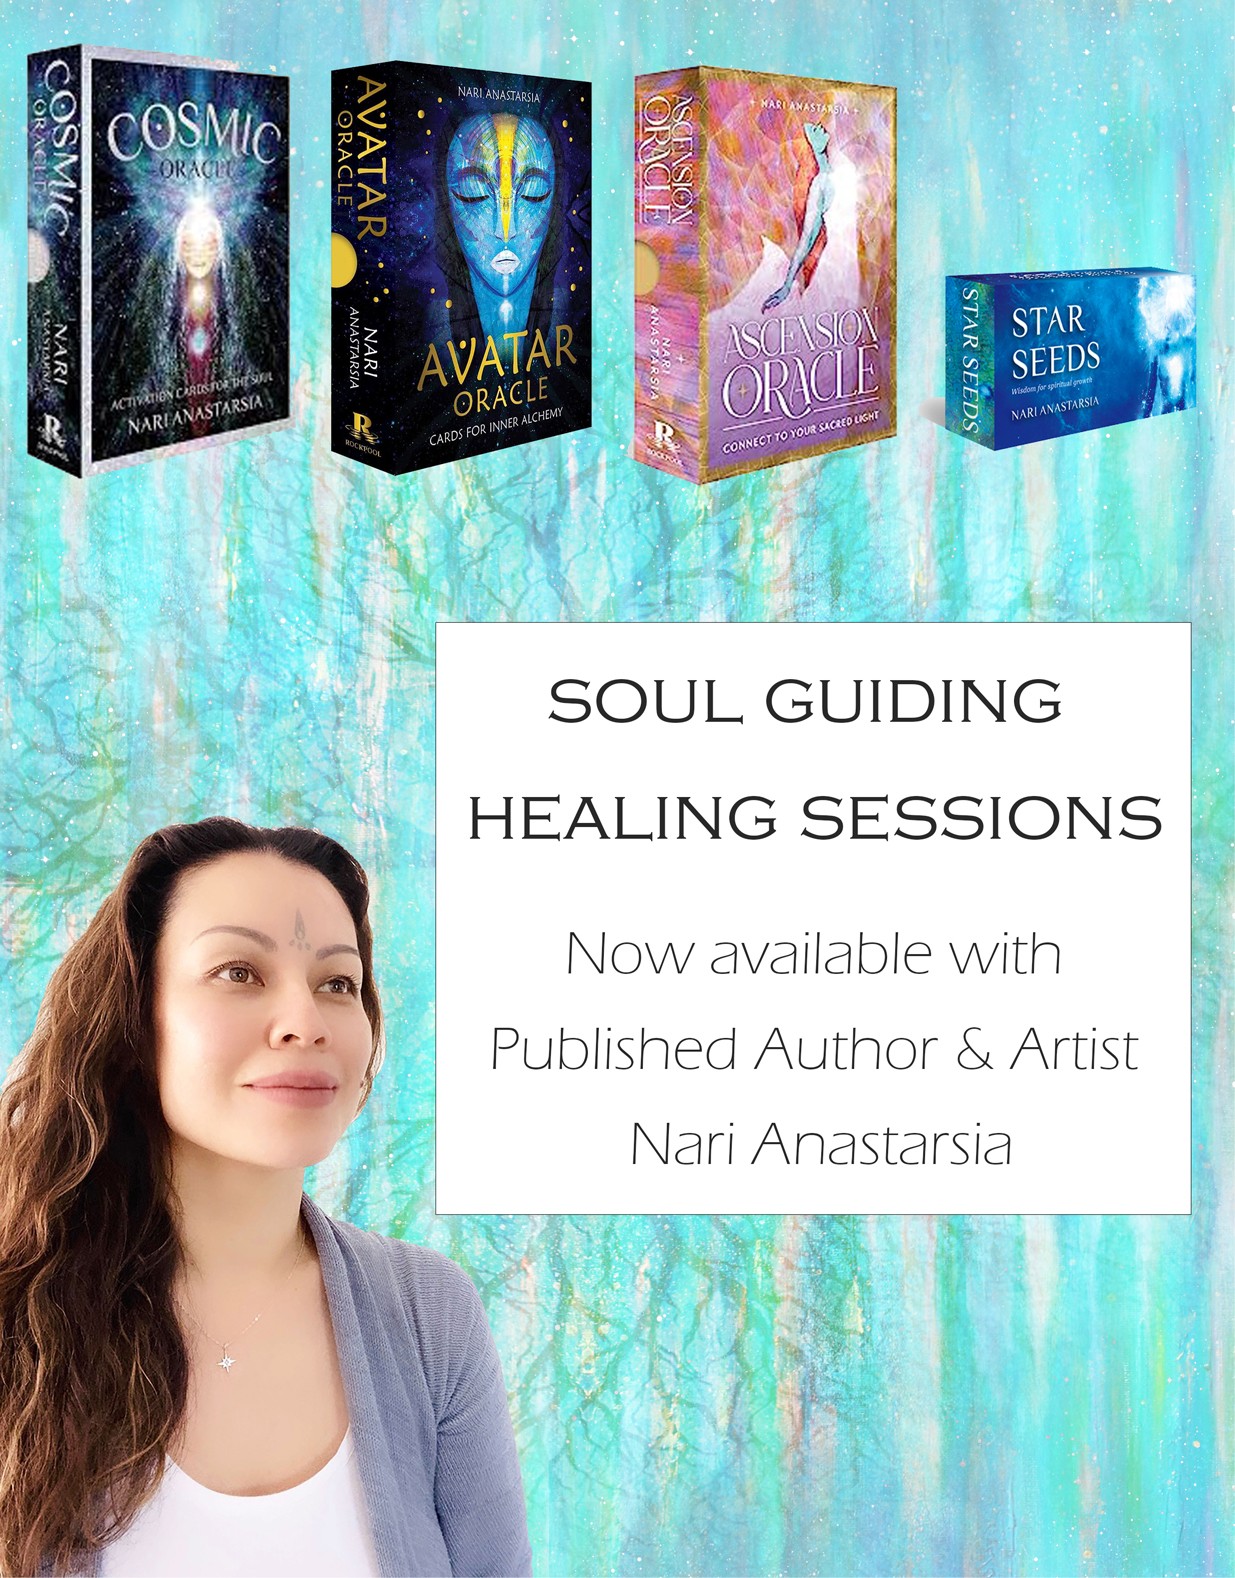 Nari Anastarsia therapist on Natural Therapy Pages